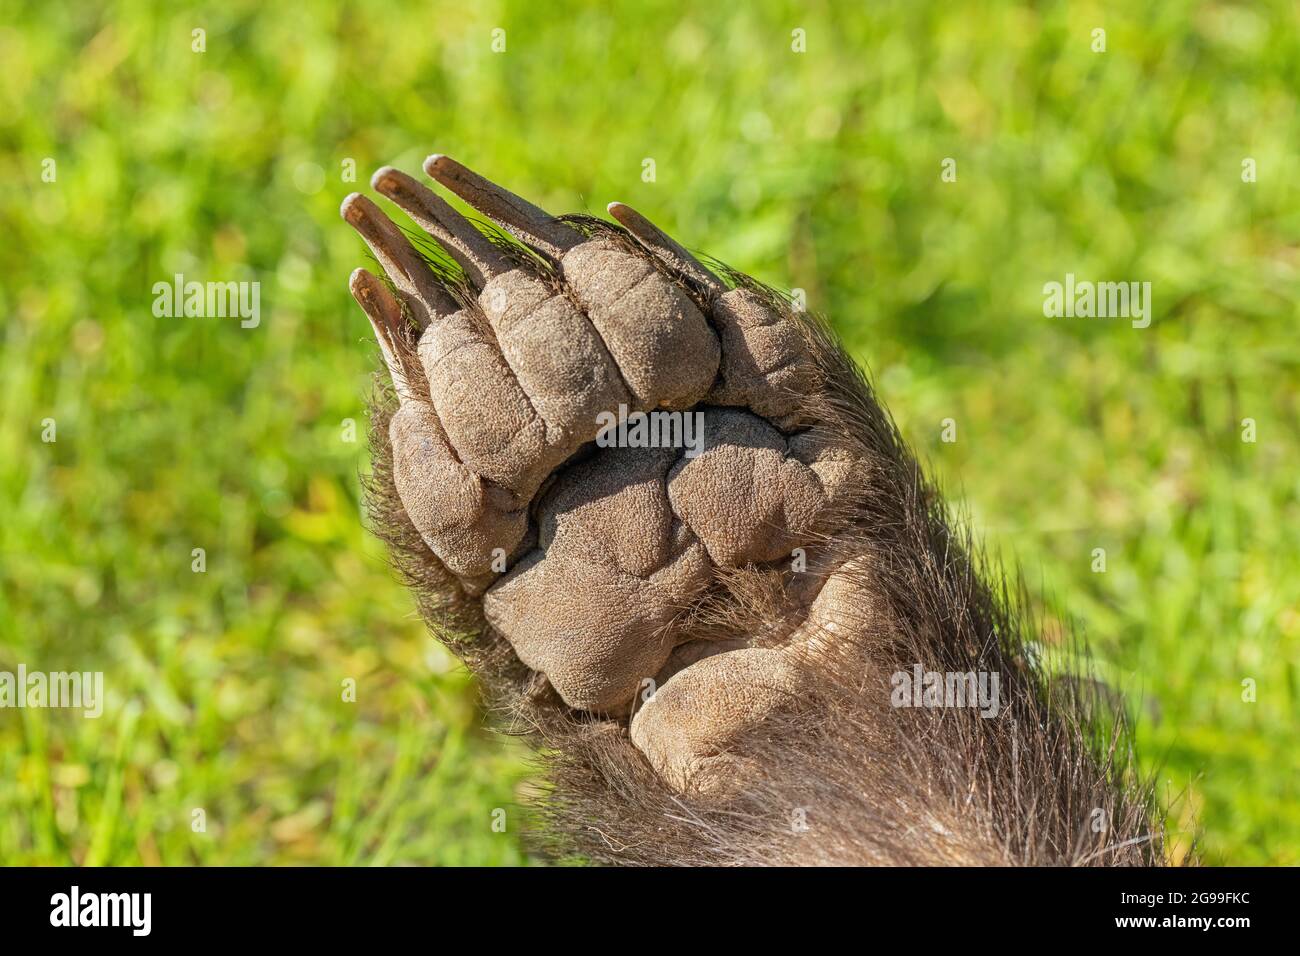 Right fore paw of a Badger (Meles meles). Underside showing claws, five digits and pads. Stock Photo